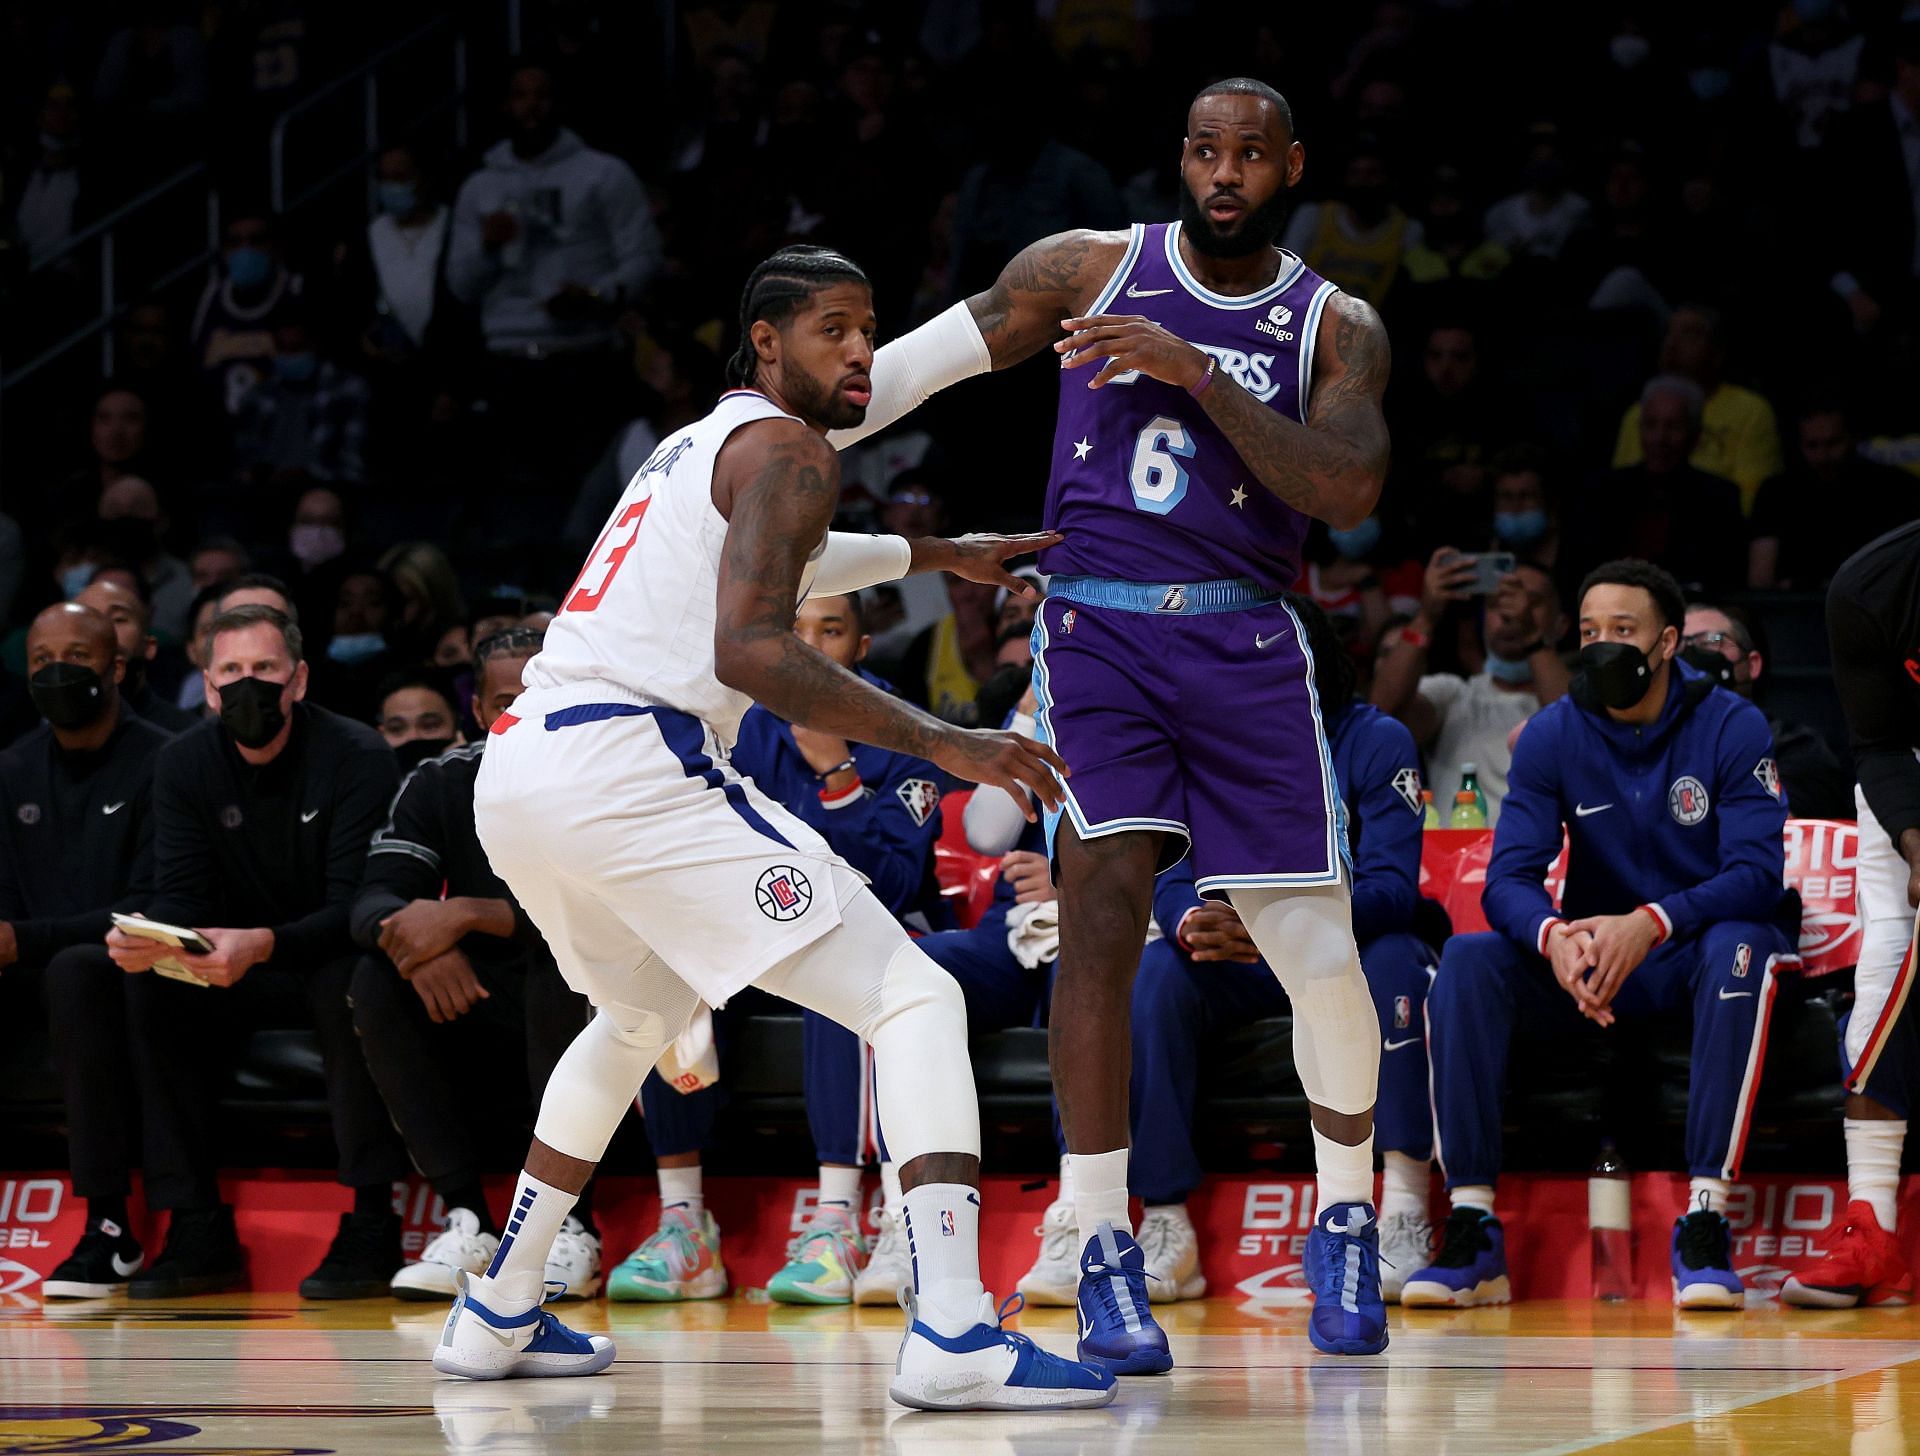 LeBron James of the LA Lakers against Paul George of the LA Clippers